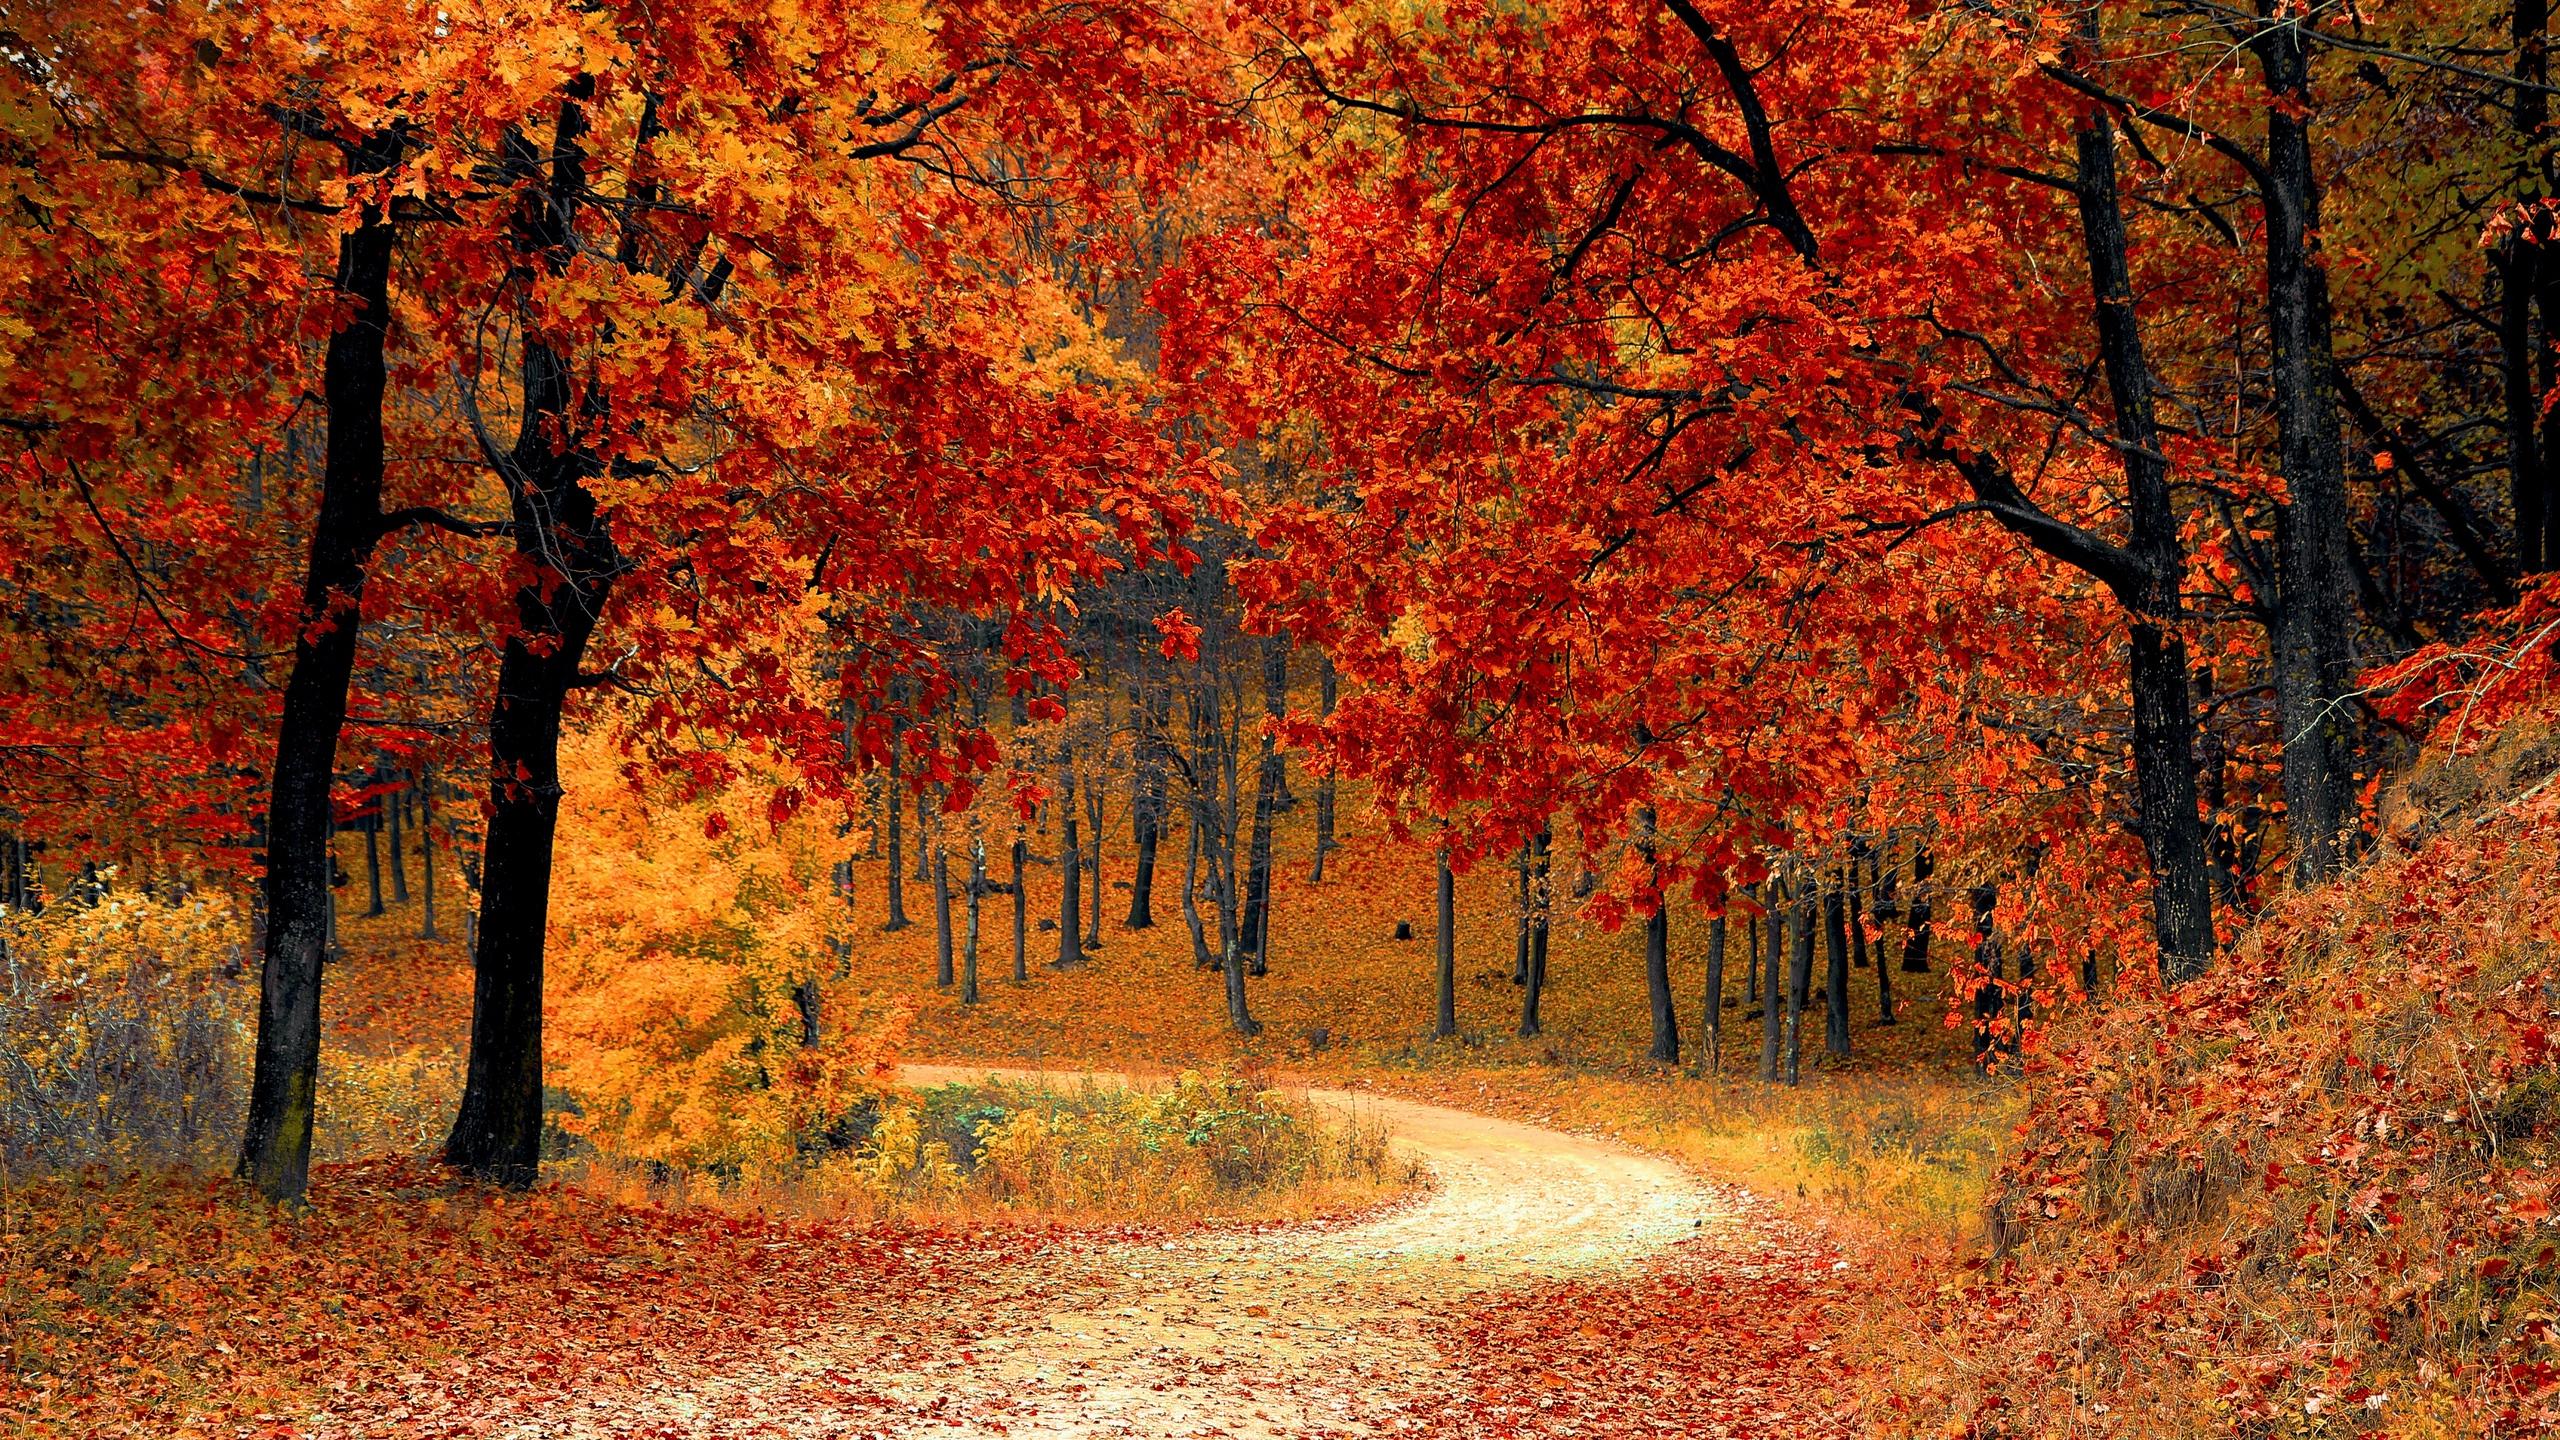 Download wallpaper 2560x1440 autumn, forest, path, foliage